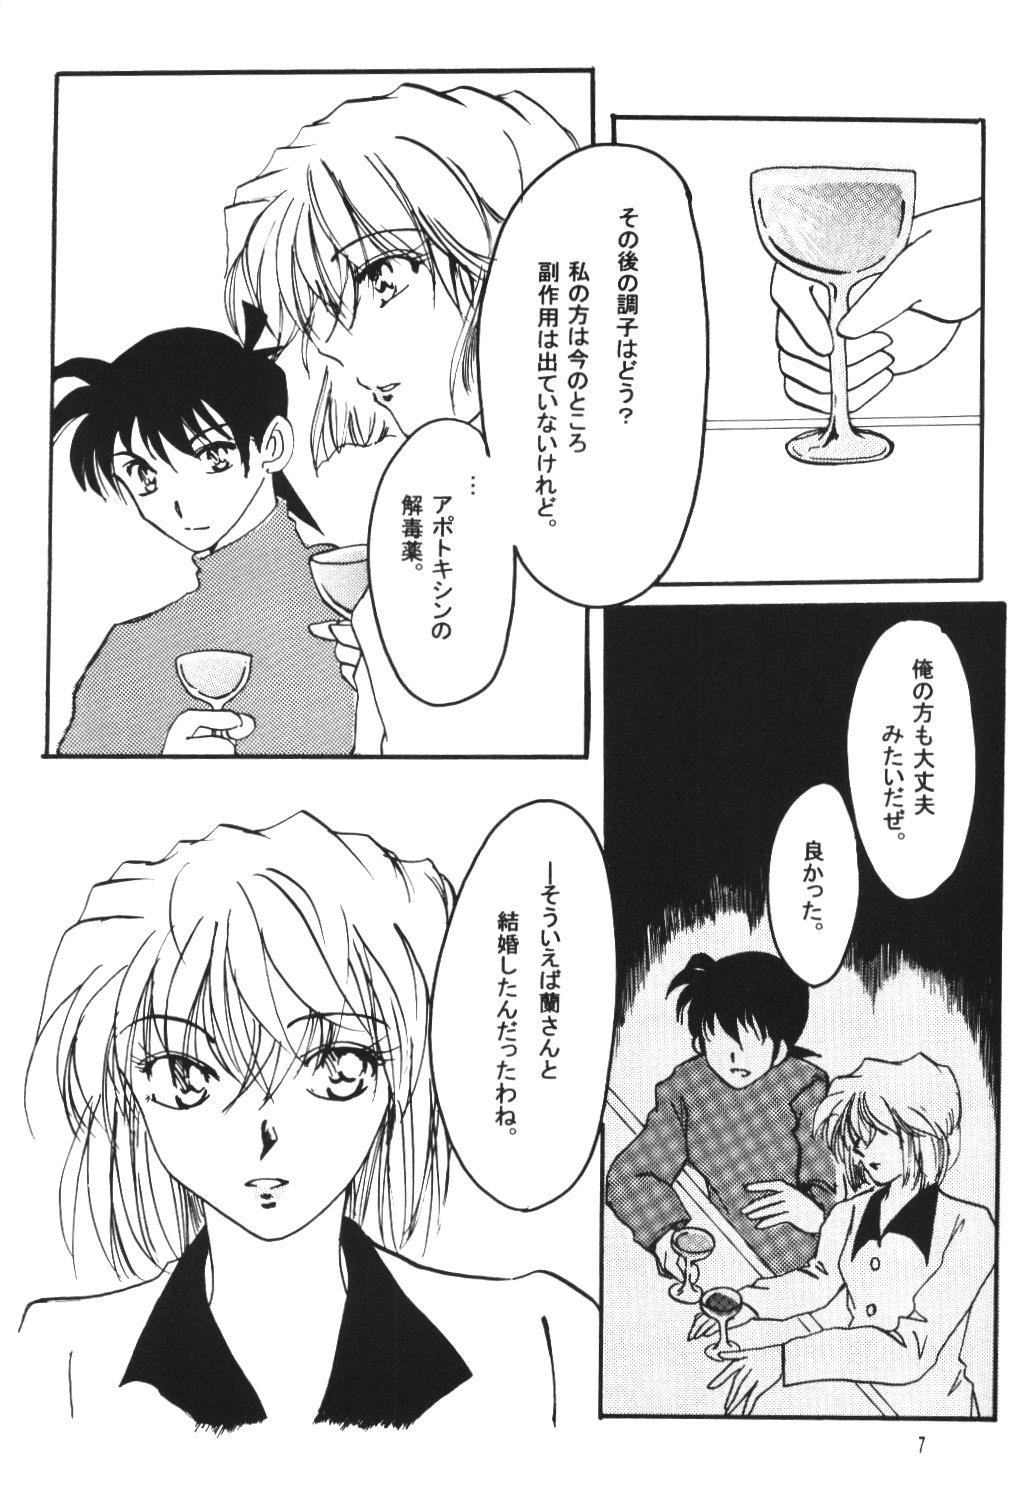 Old And Young Over Drive - Detective conan Gay Blondhair - Page 6